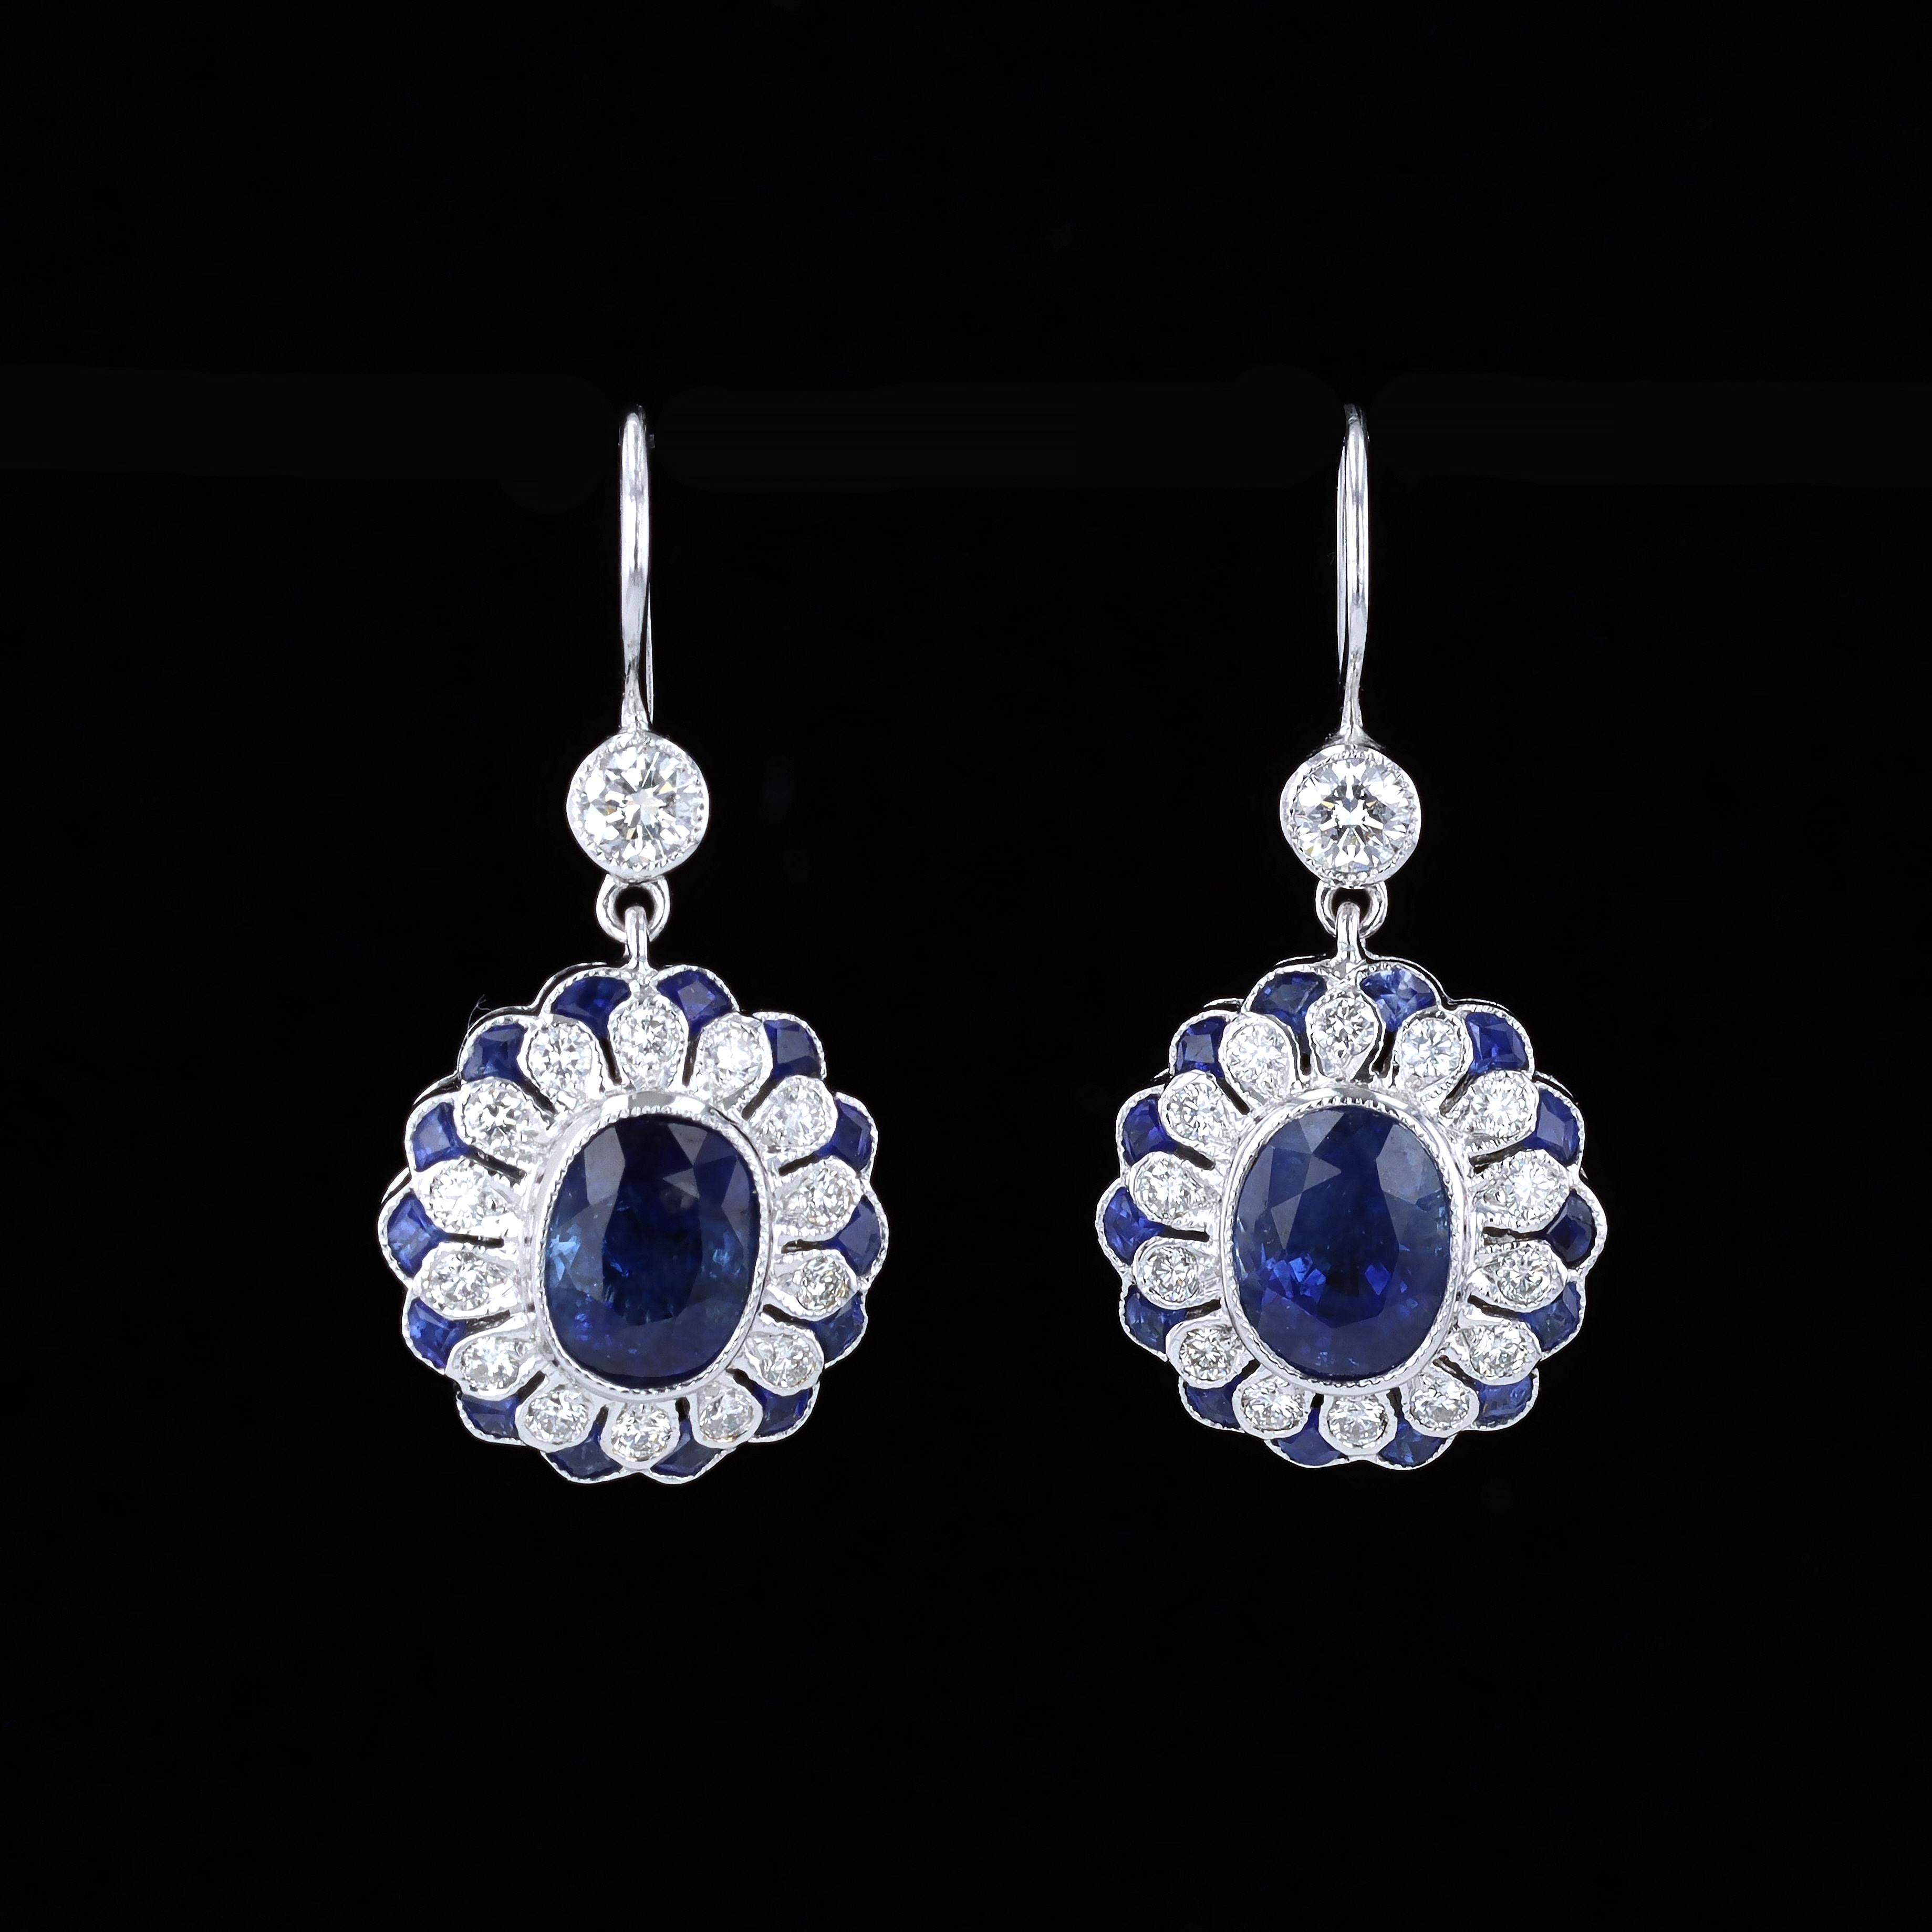 18K White Gold Diamond and Sapphire Earrings In Excellent Condition For Sale In NEW ORLEANS, LA